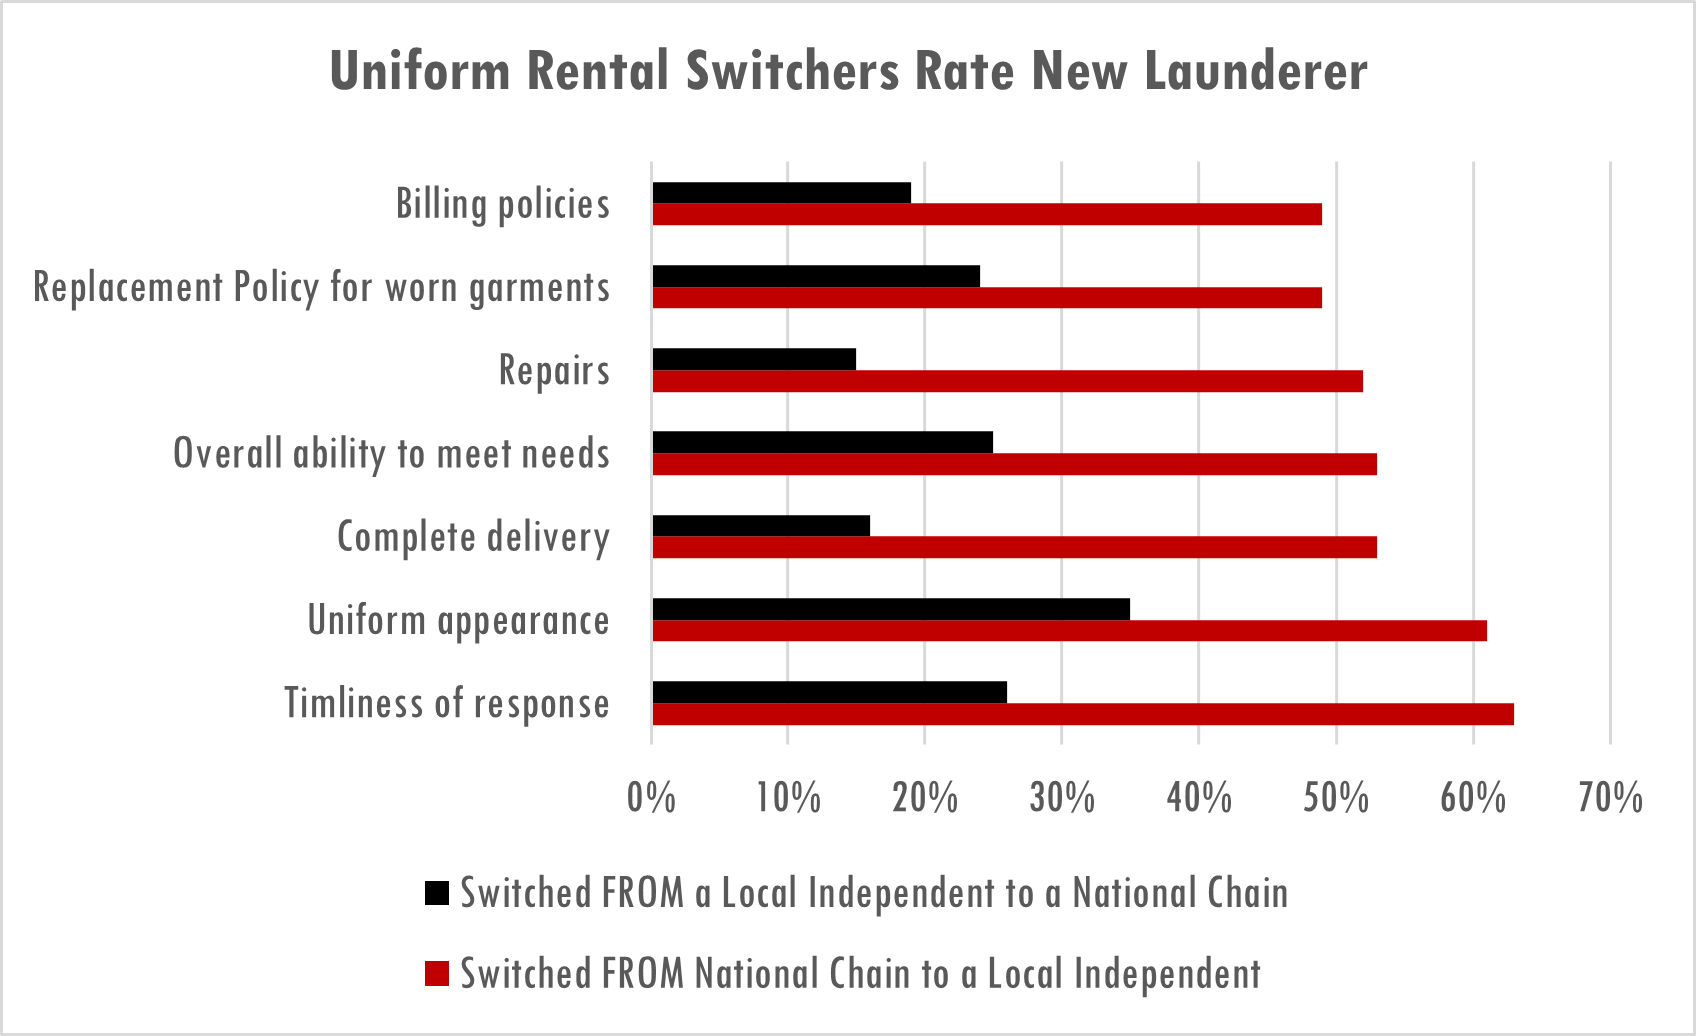 Uniform rental switchers rate new launders switched from national chain to local independent